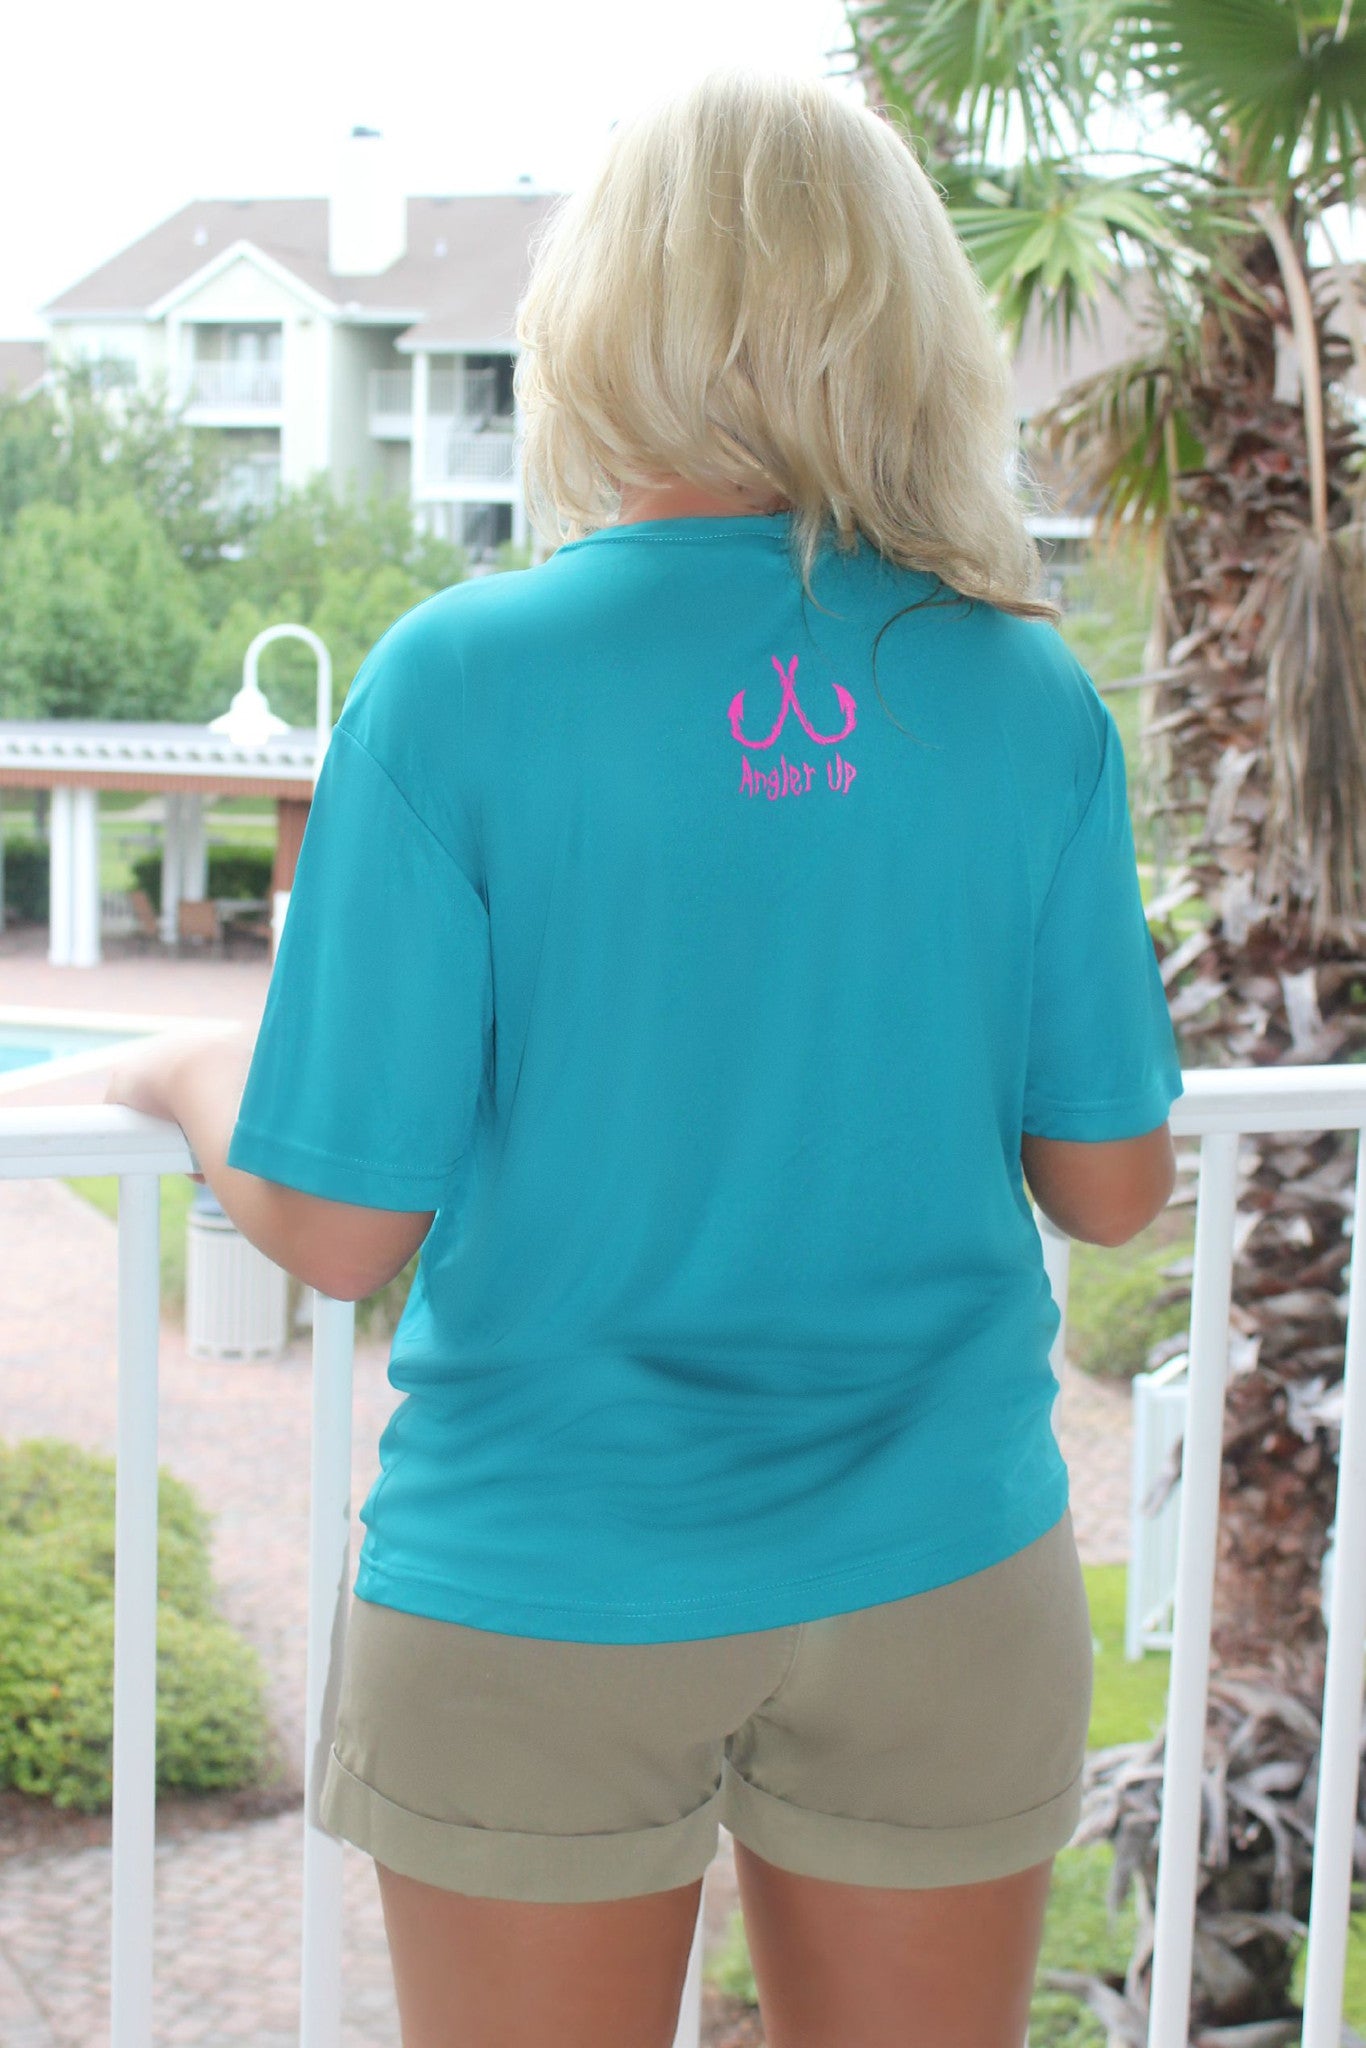 Angler Up: Short Sleeve Performance Tee, Turquoise/Pink